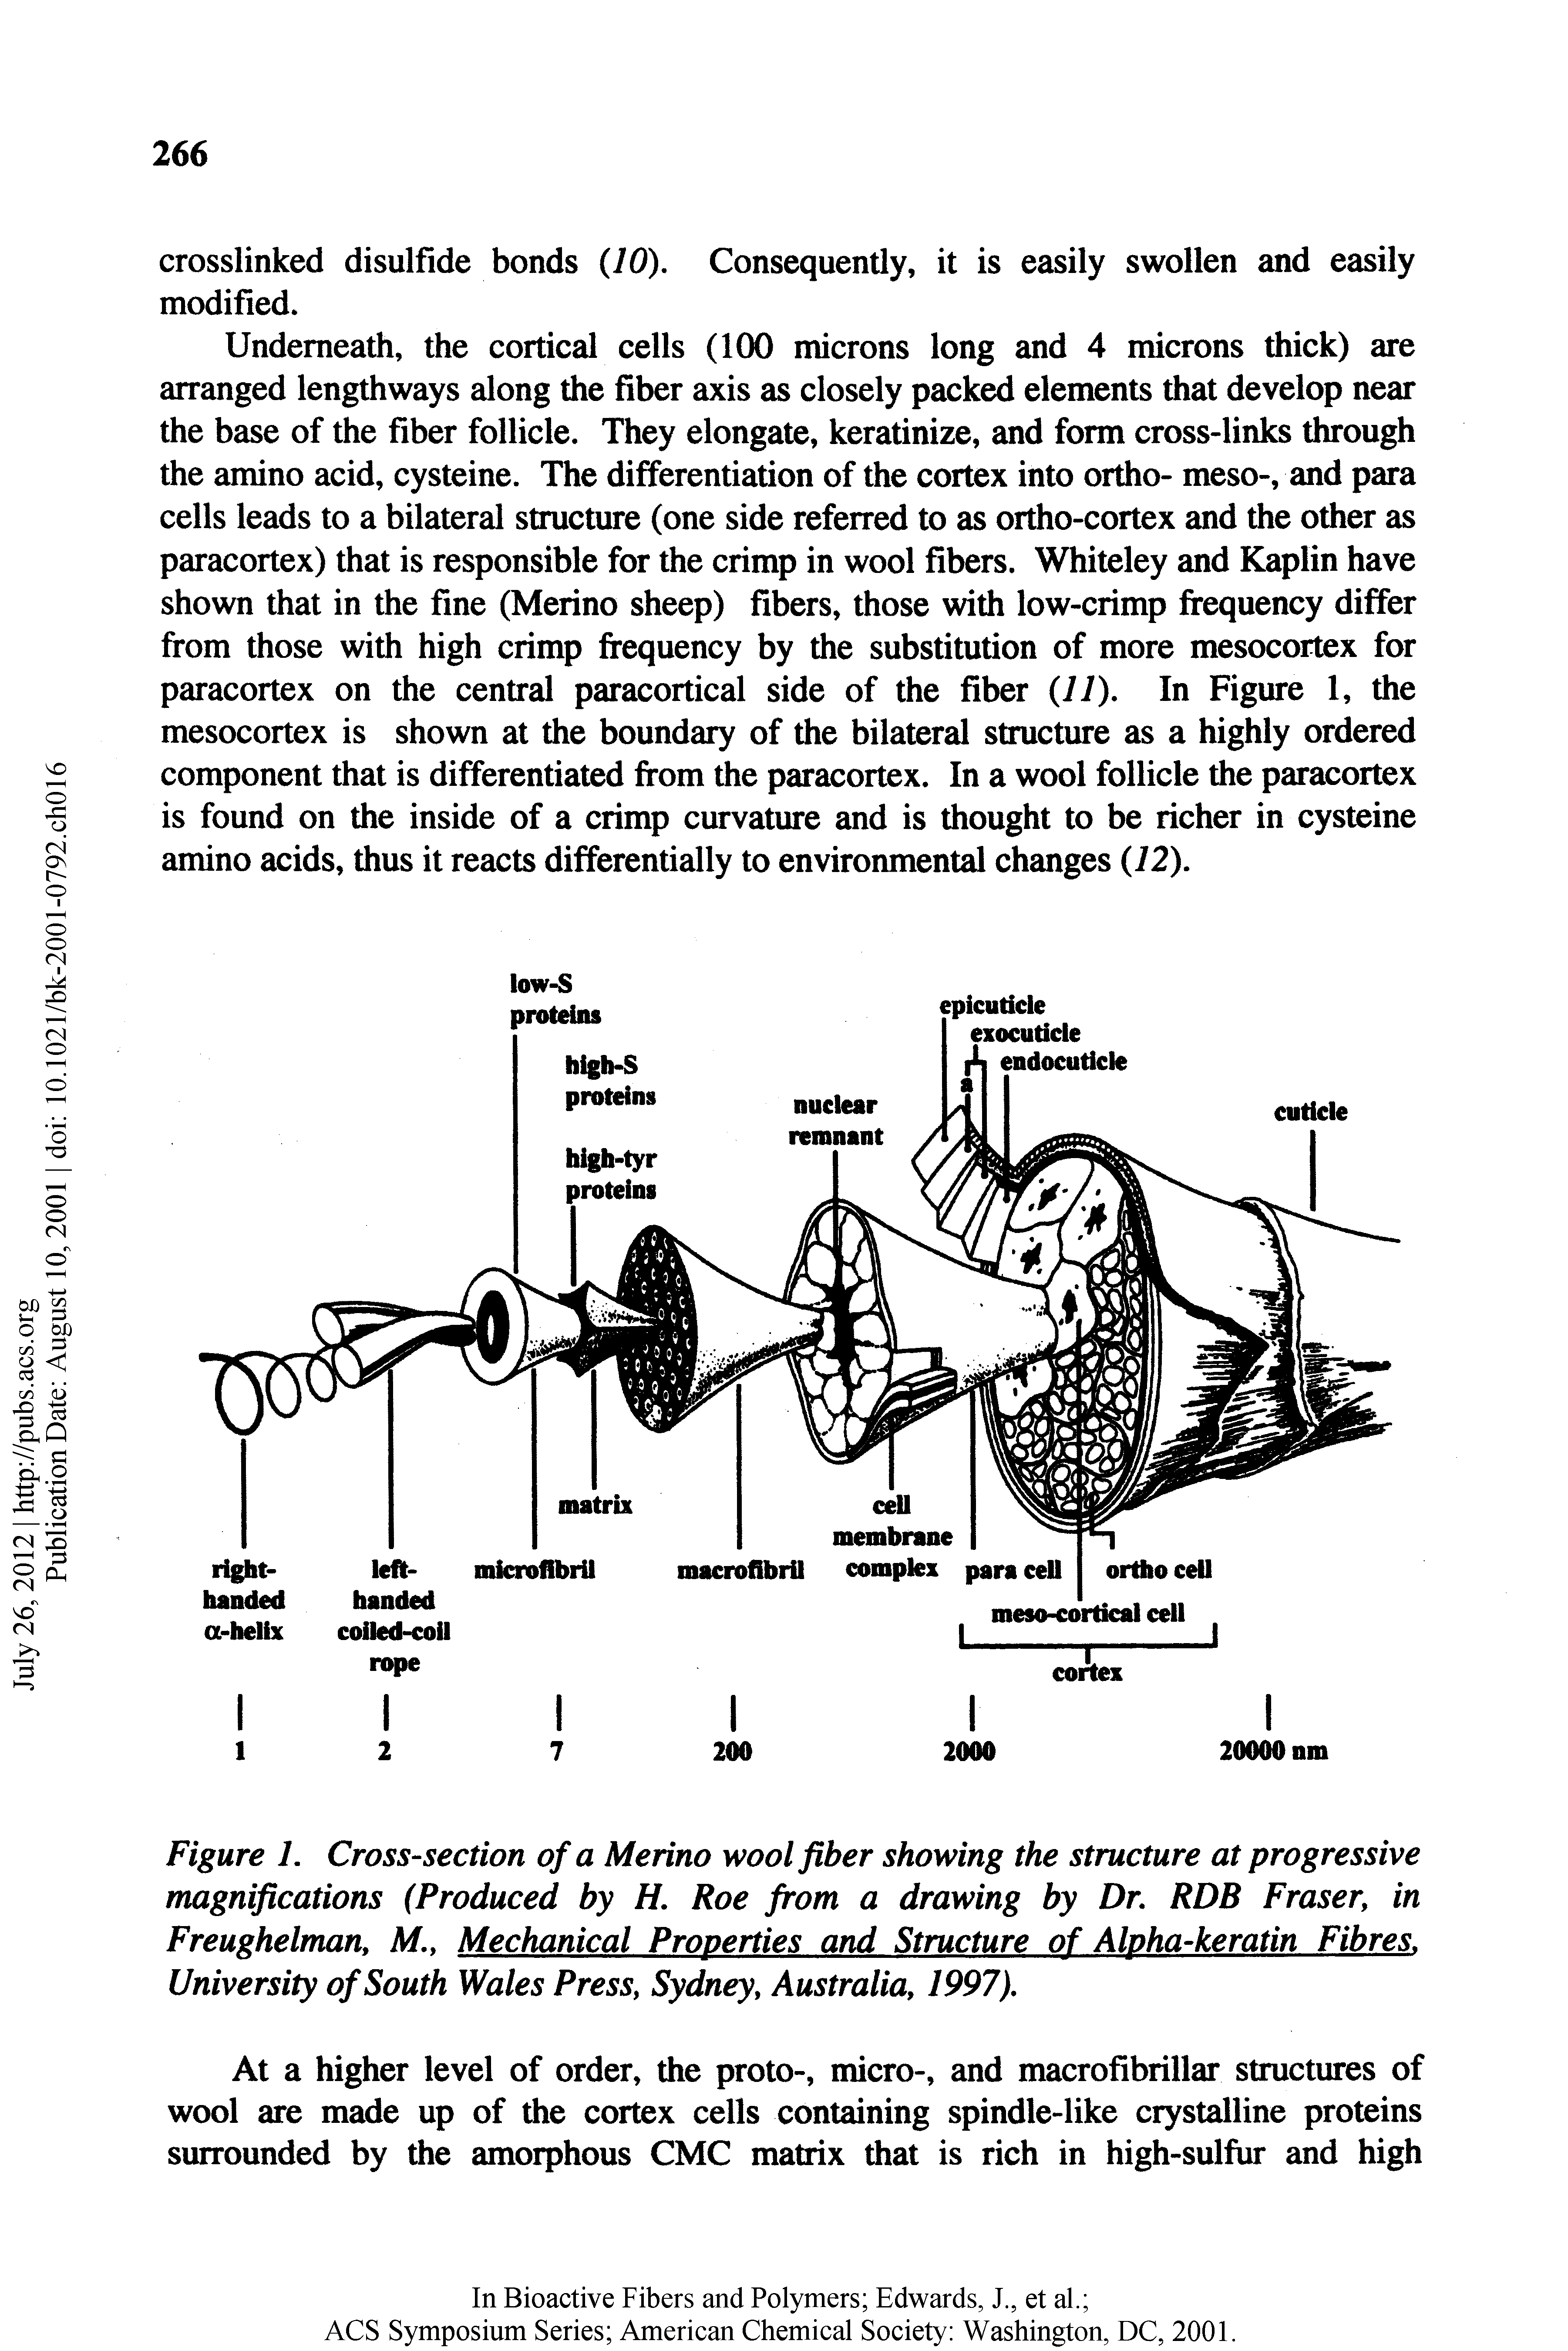 Figure 7. Cross-section of a Merino wool fiber showing the structure at progressive magnifications (Produced by 77. Roe from a drawing by Dr. RDB Fraser, in Freughelman, M, Mechanical Properties and Structure of Alpha-keratin Fibres. University of South Wales Press, Sydney, Australia, 1997).